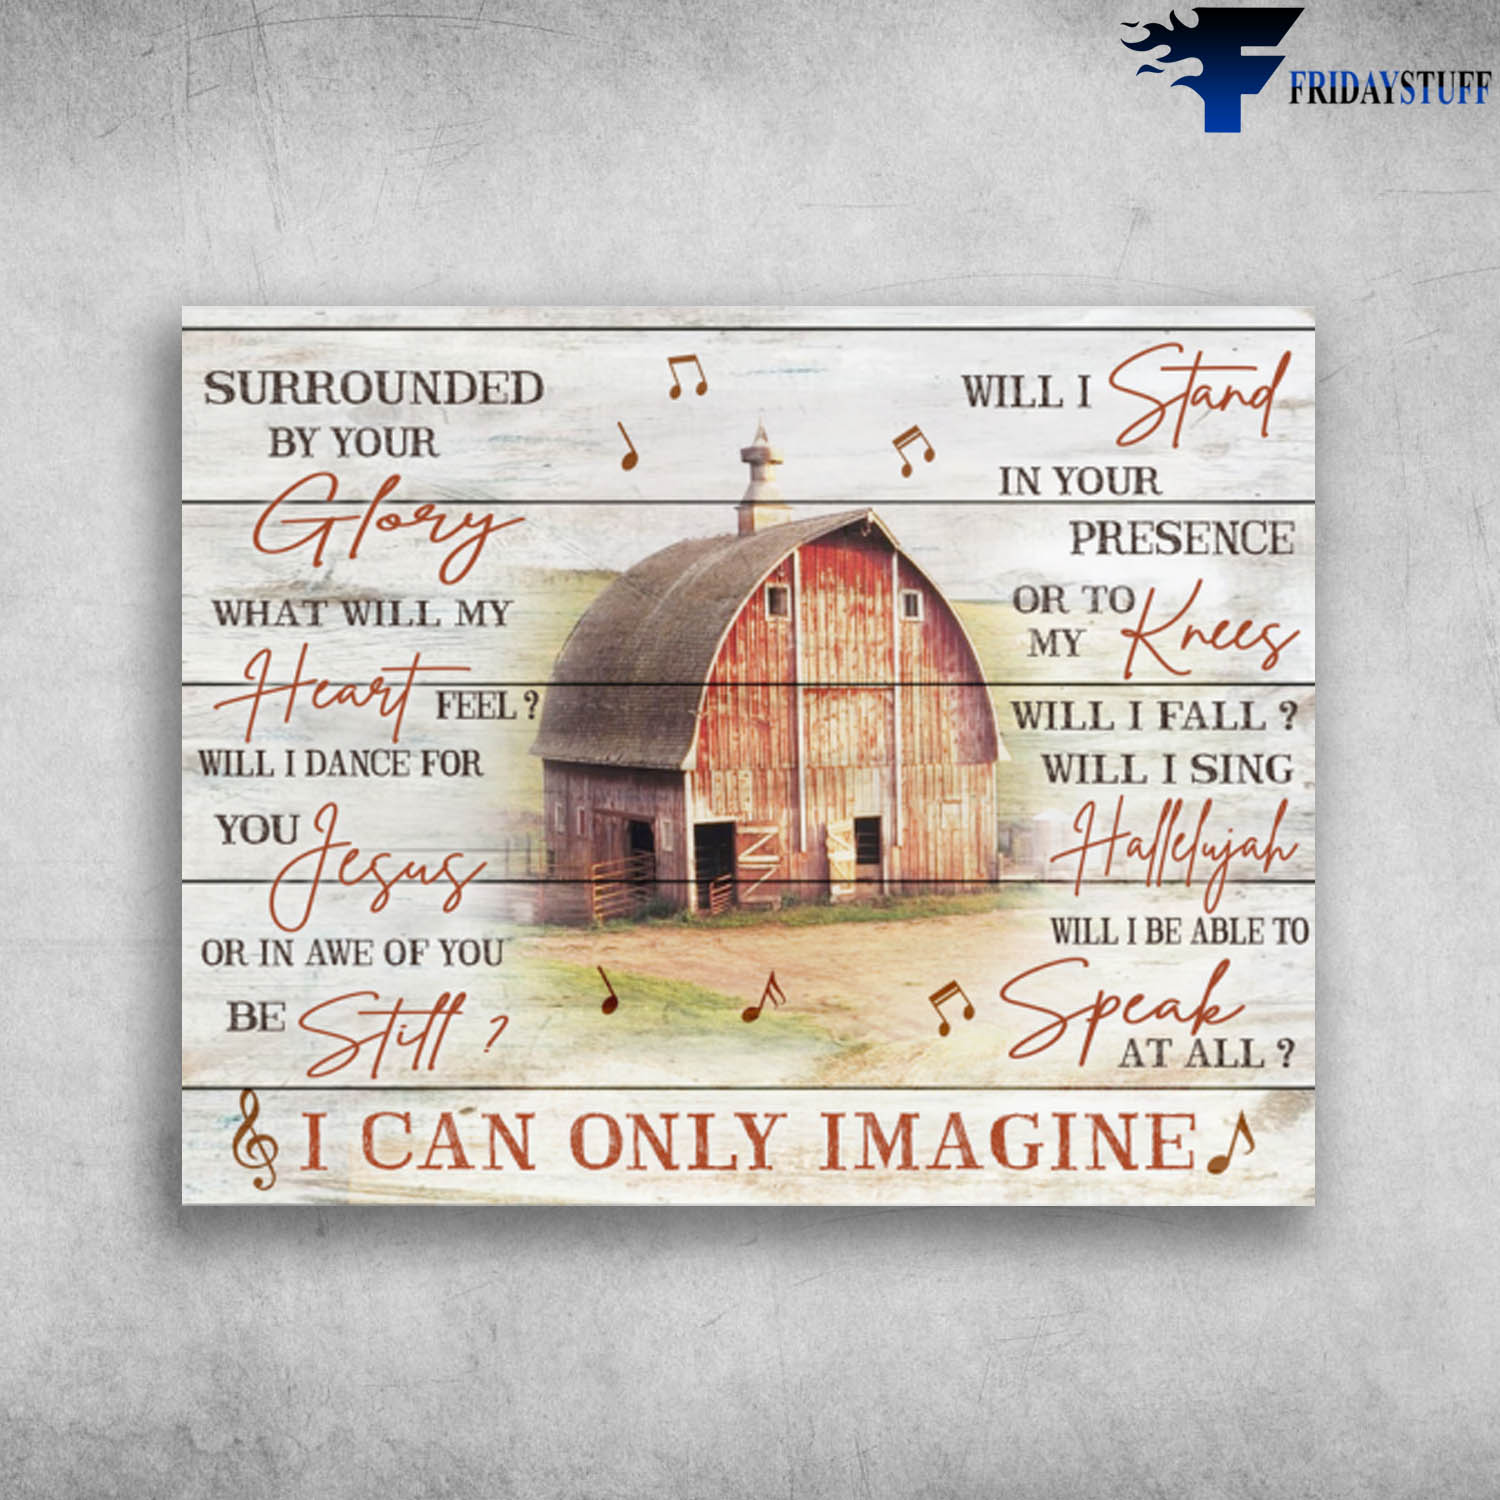 I Can Only Imagine Farm In The Countryside MercyMe The Worship Project 1999